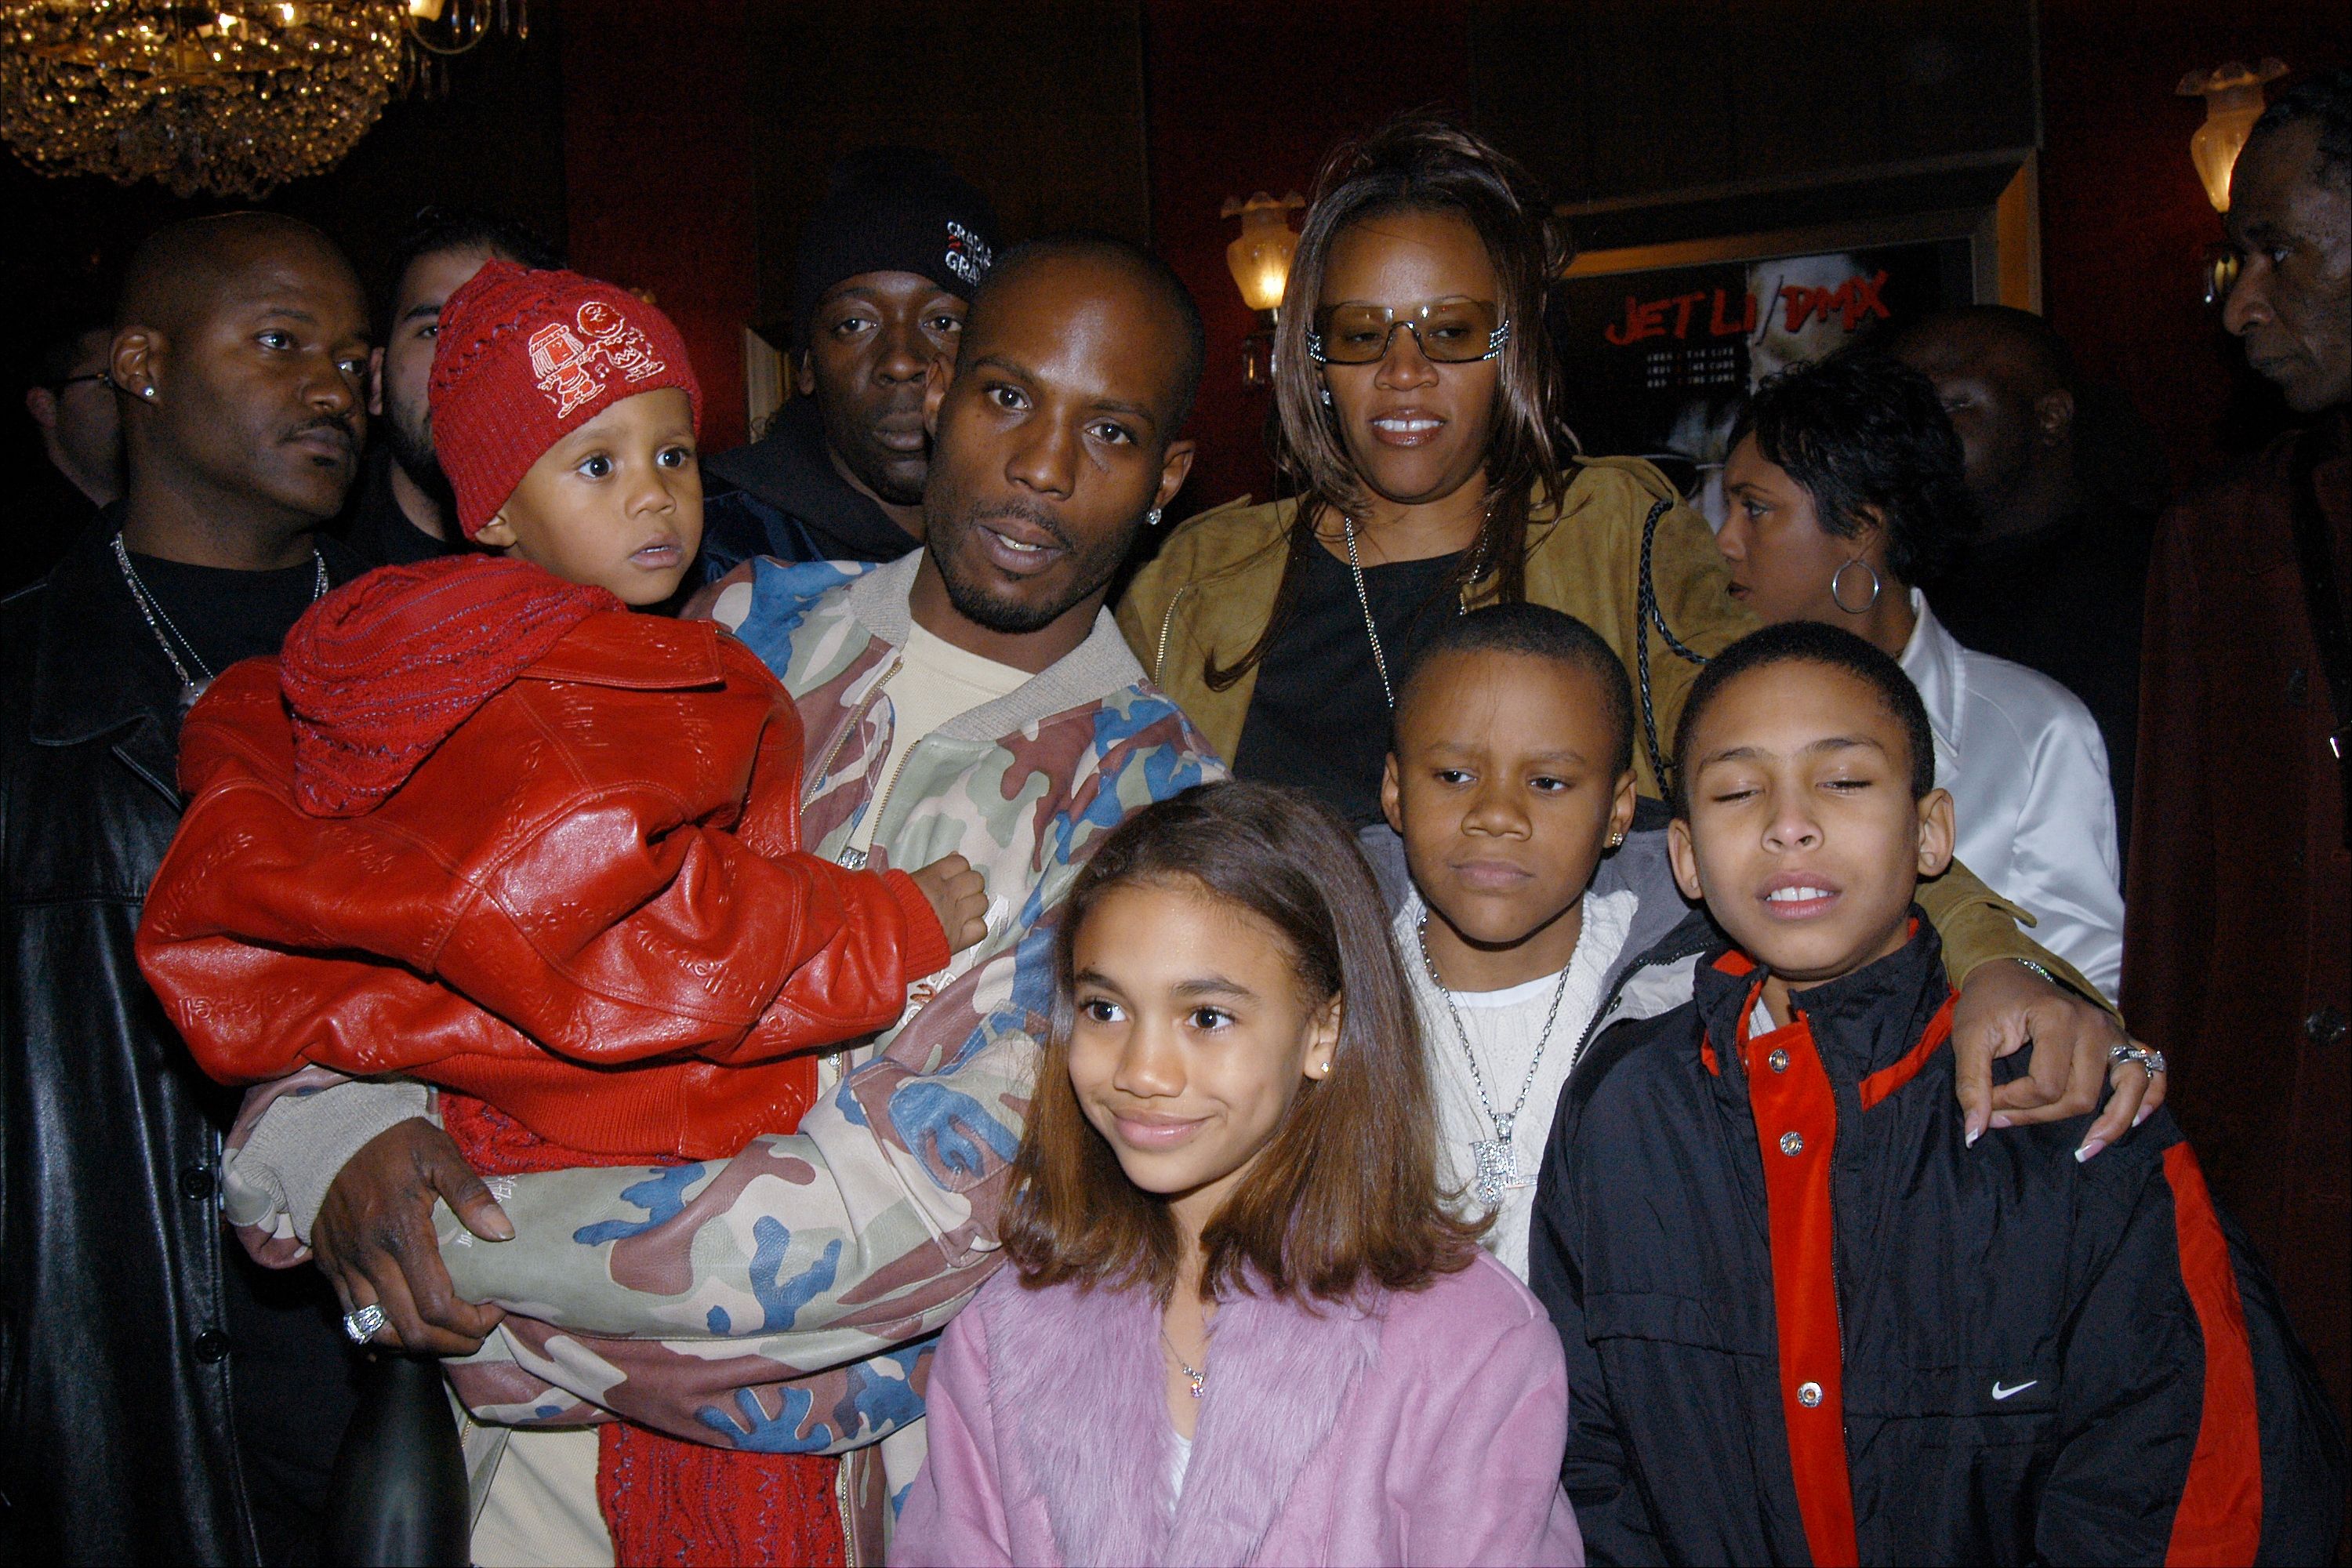 Rapper DMX, wife Tashera and children at the Ziegfeld Theater "Cradle 2 the Grave" movie premiere. | Photo: Getty Images